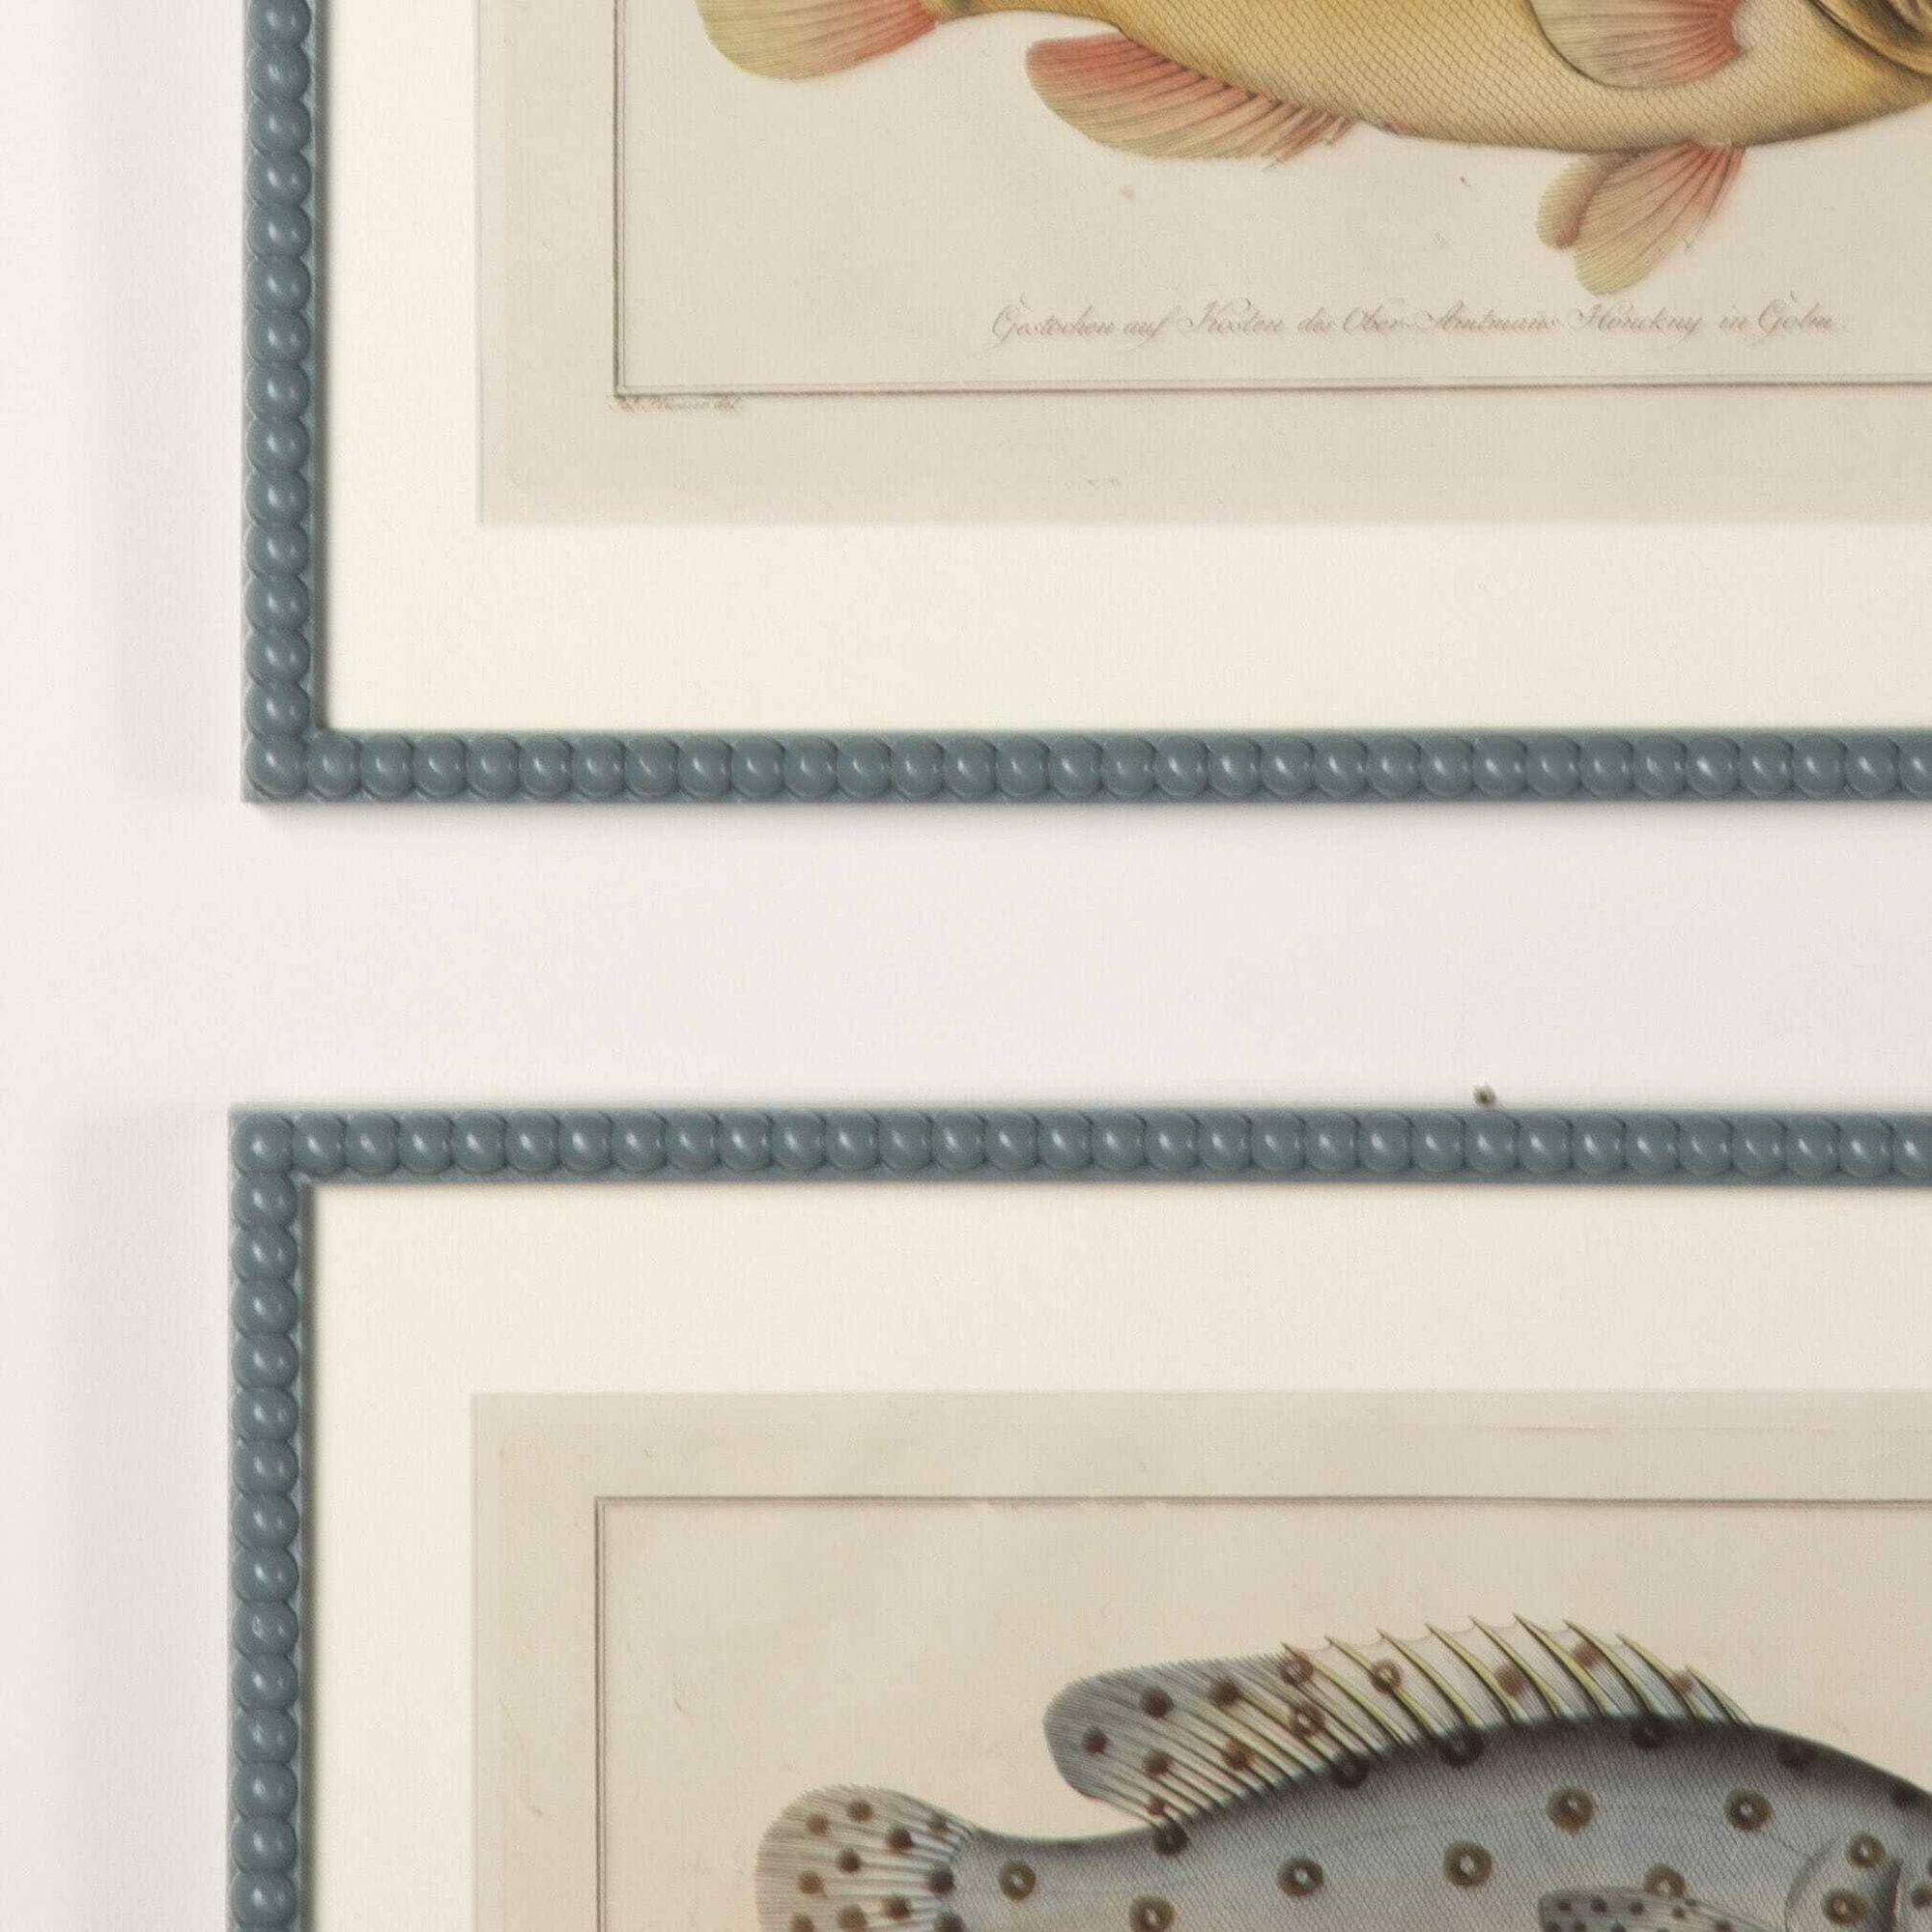 Superb set of six original 18th Century fish engravings by Marcus Bloch.
Presented in bespoke hand-painted and lacquered bobbin frames with hessian mounts and AR70 Artglass for optimal clarity.
These natural history fish studies are from the